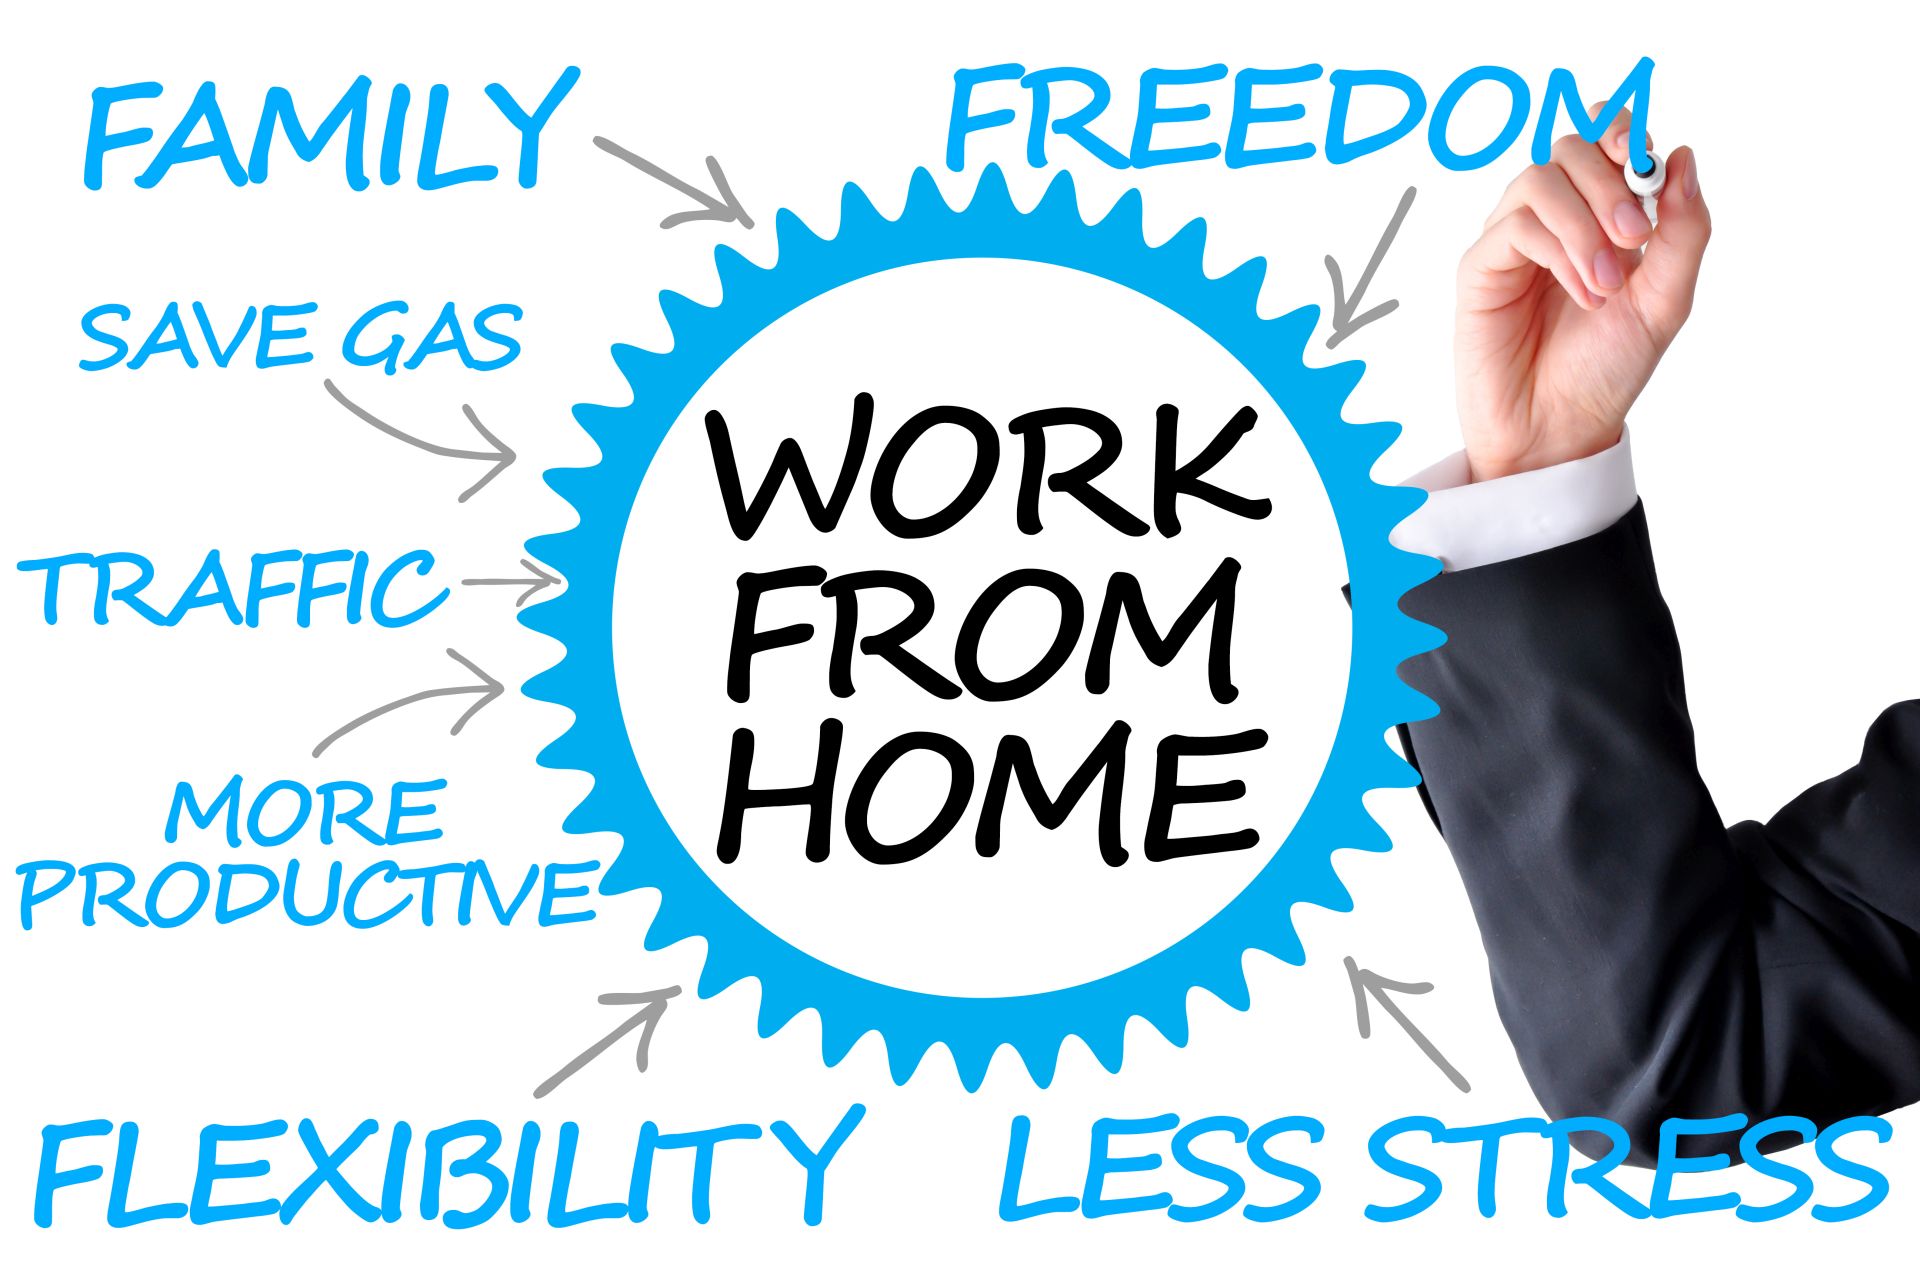 Working from home pros and cons